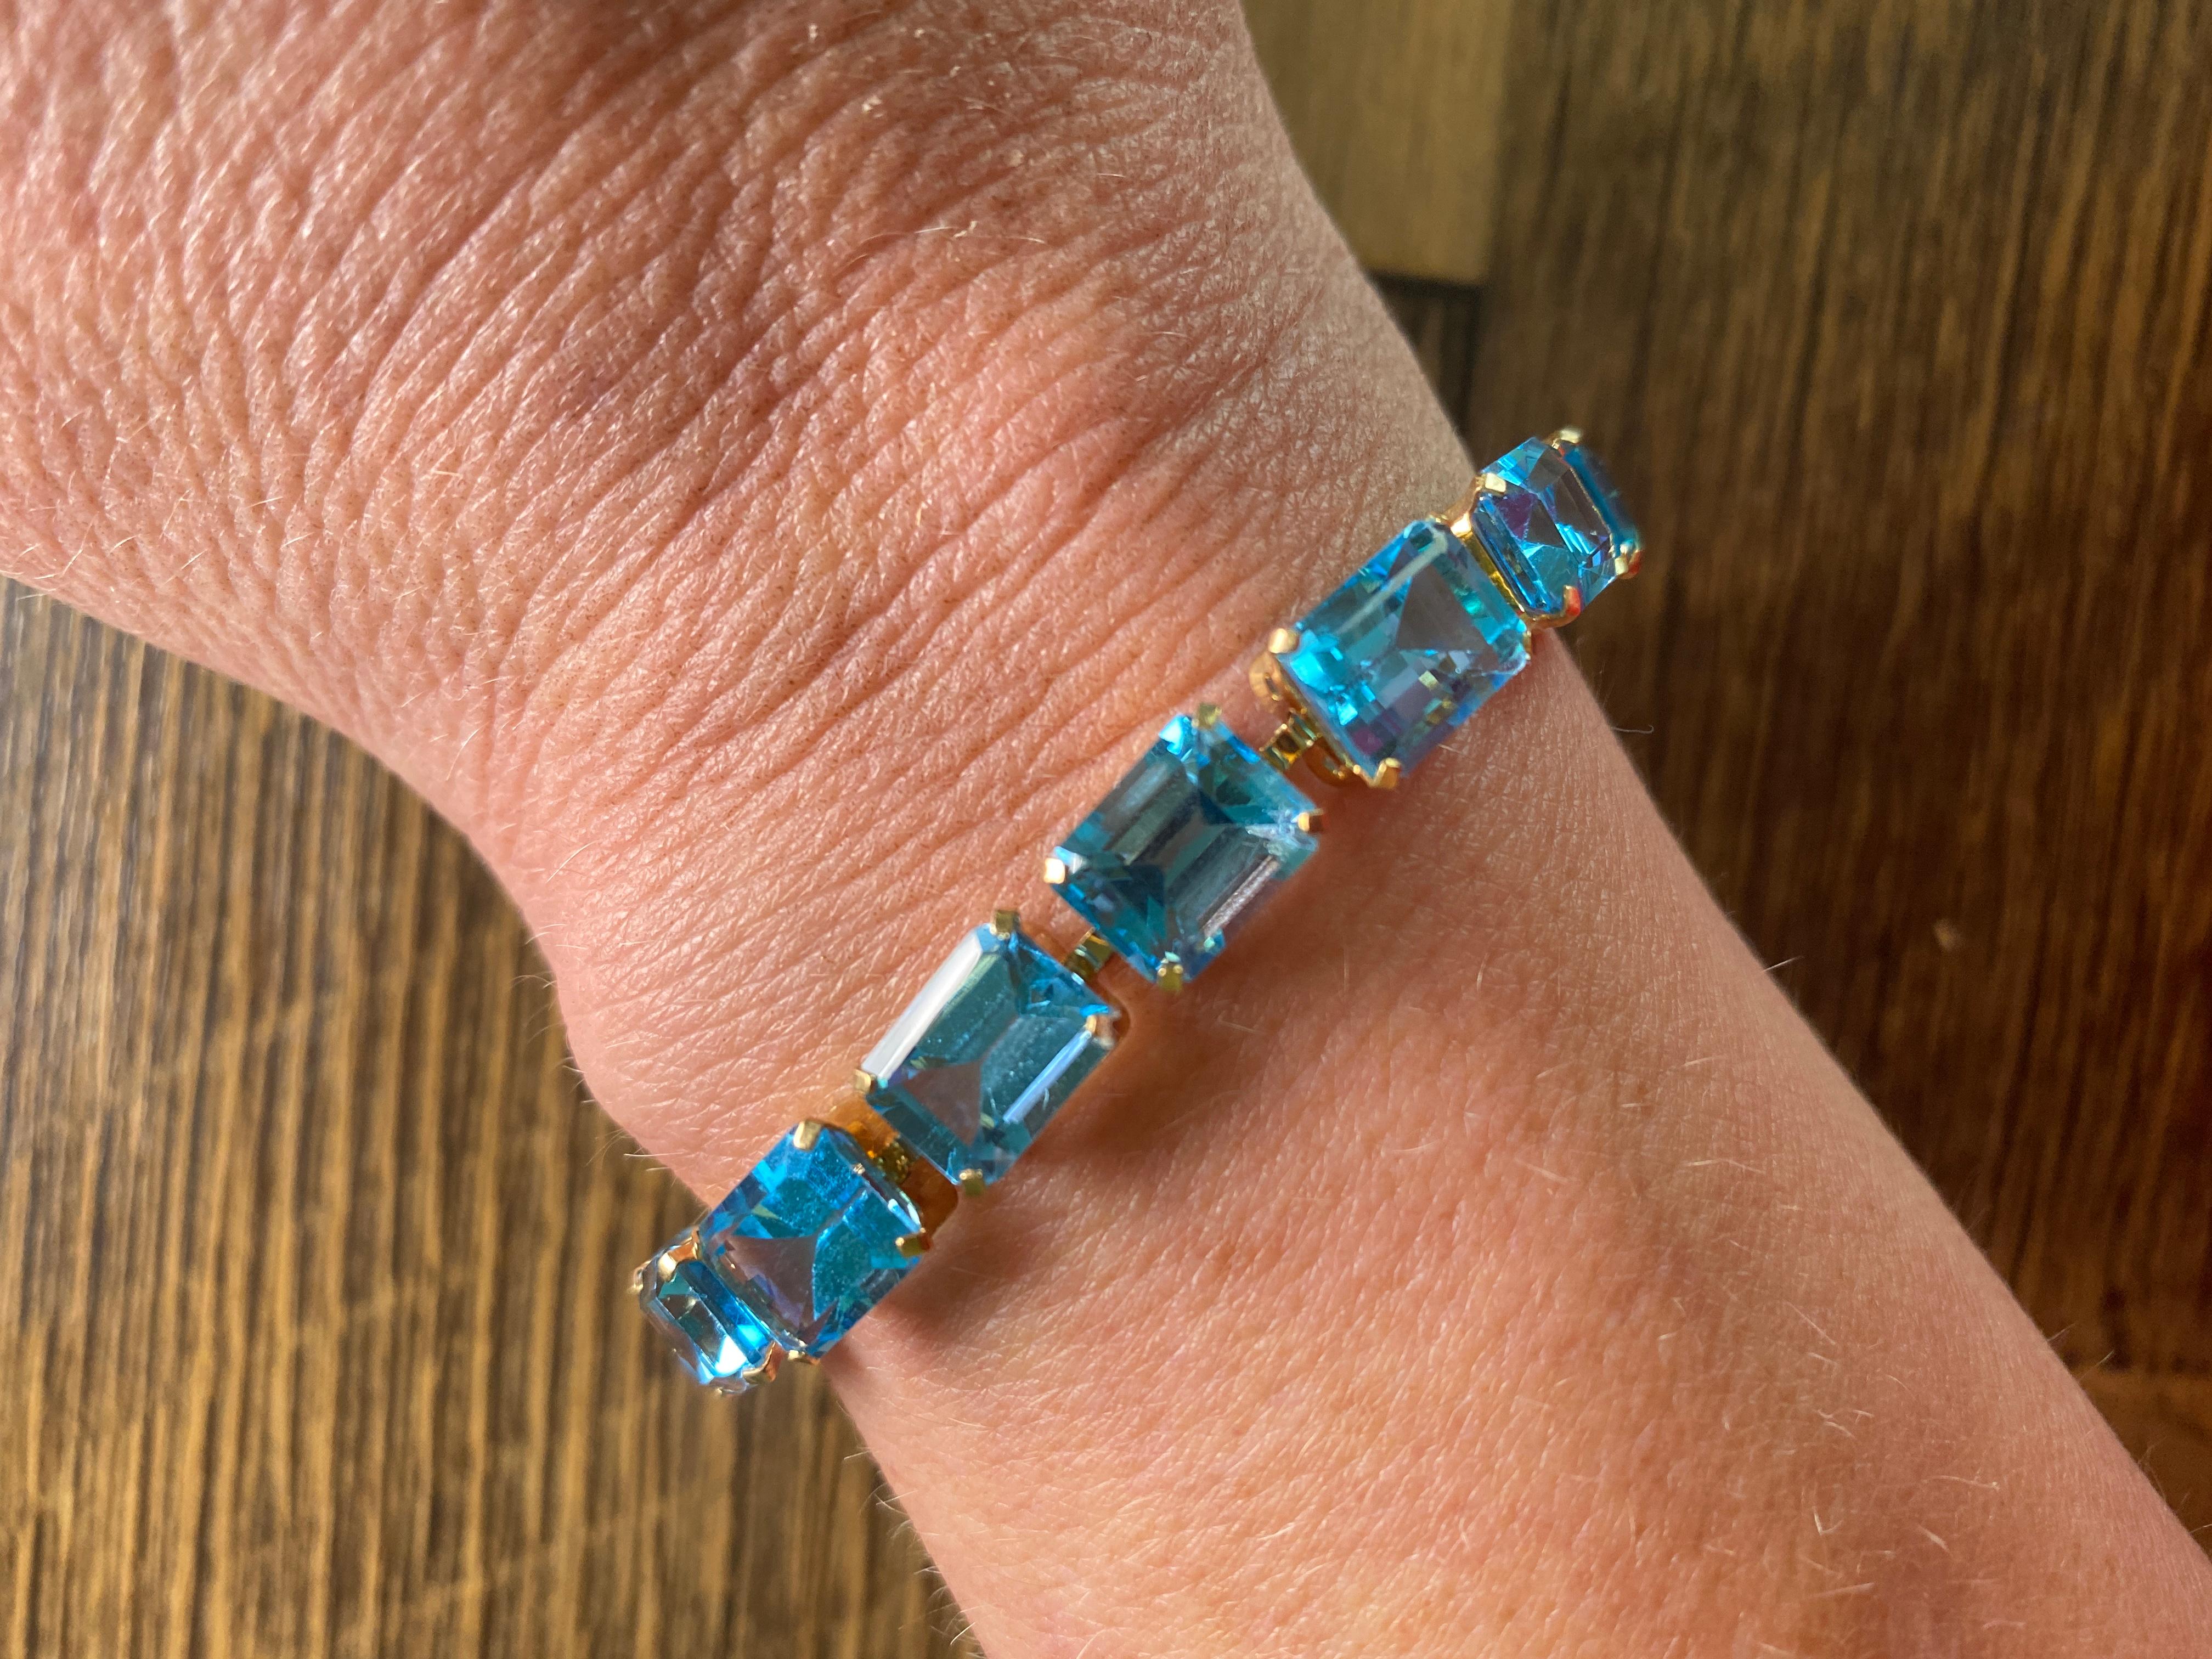 Vintage, 10K Yellow Gold Baguette Blue Topaz Tennis Bracelet, 7 1/2 inches.  Delicate 10kt gold bezels hold each stone with prongs. Lovely for day or night. Each stone measures 7mm x 9mm. Approximately 13.5 carats of Blue Topaz stones.